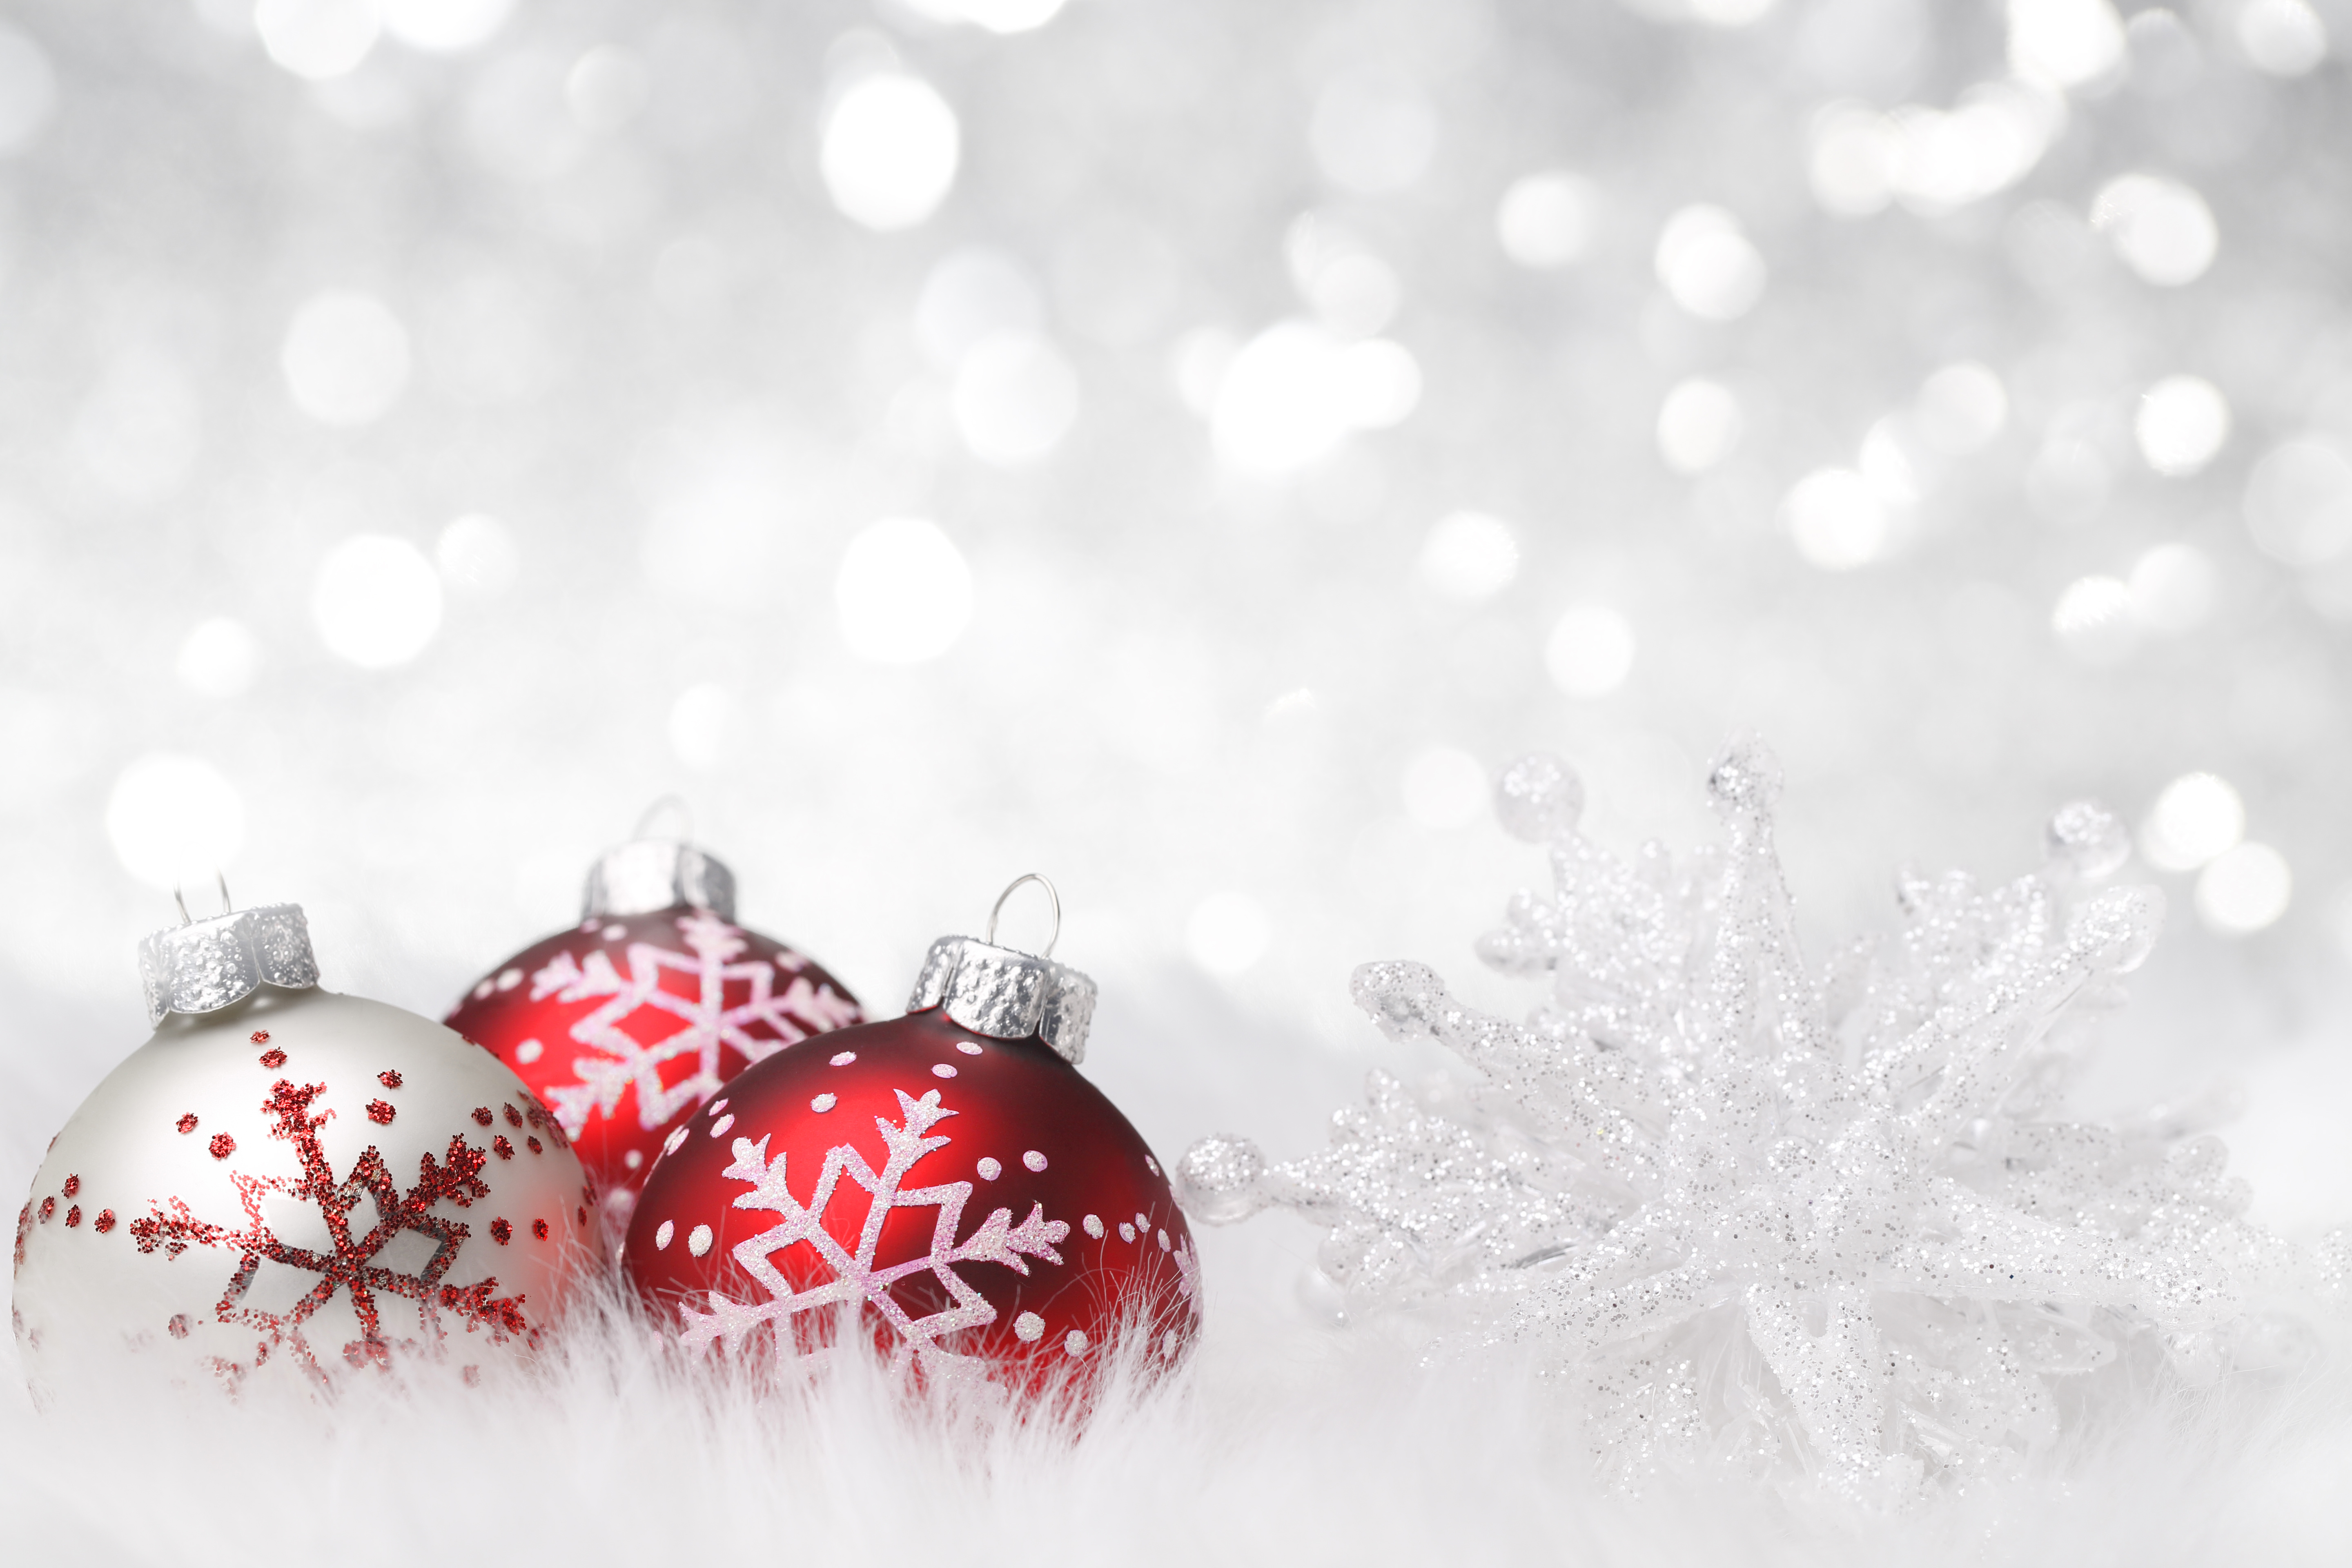 Christmas Images Background Free Download - Free Christmas Background ...